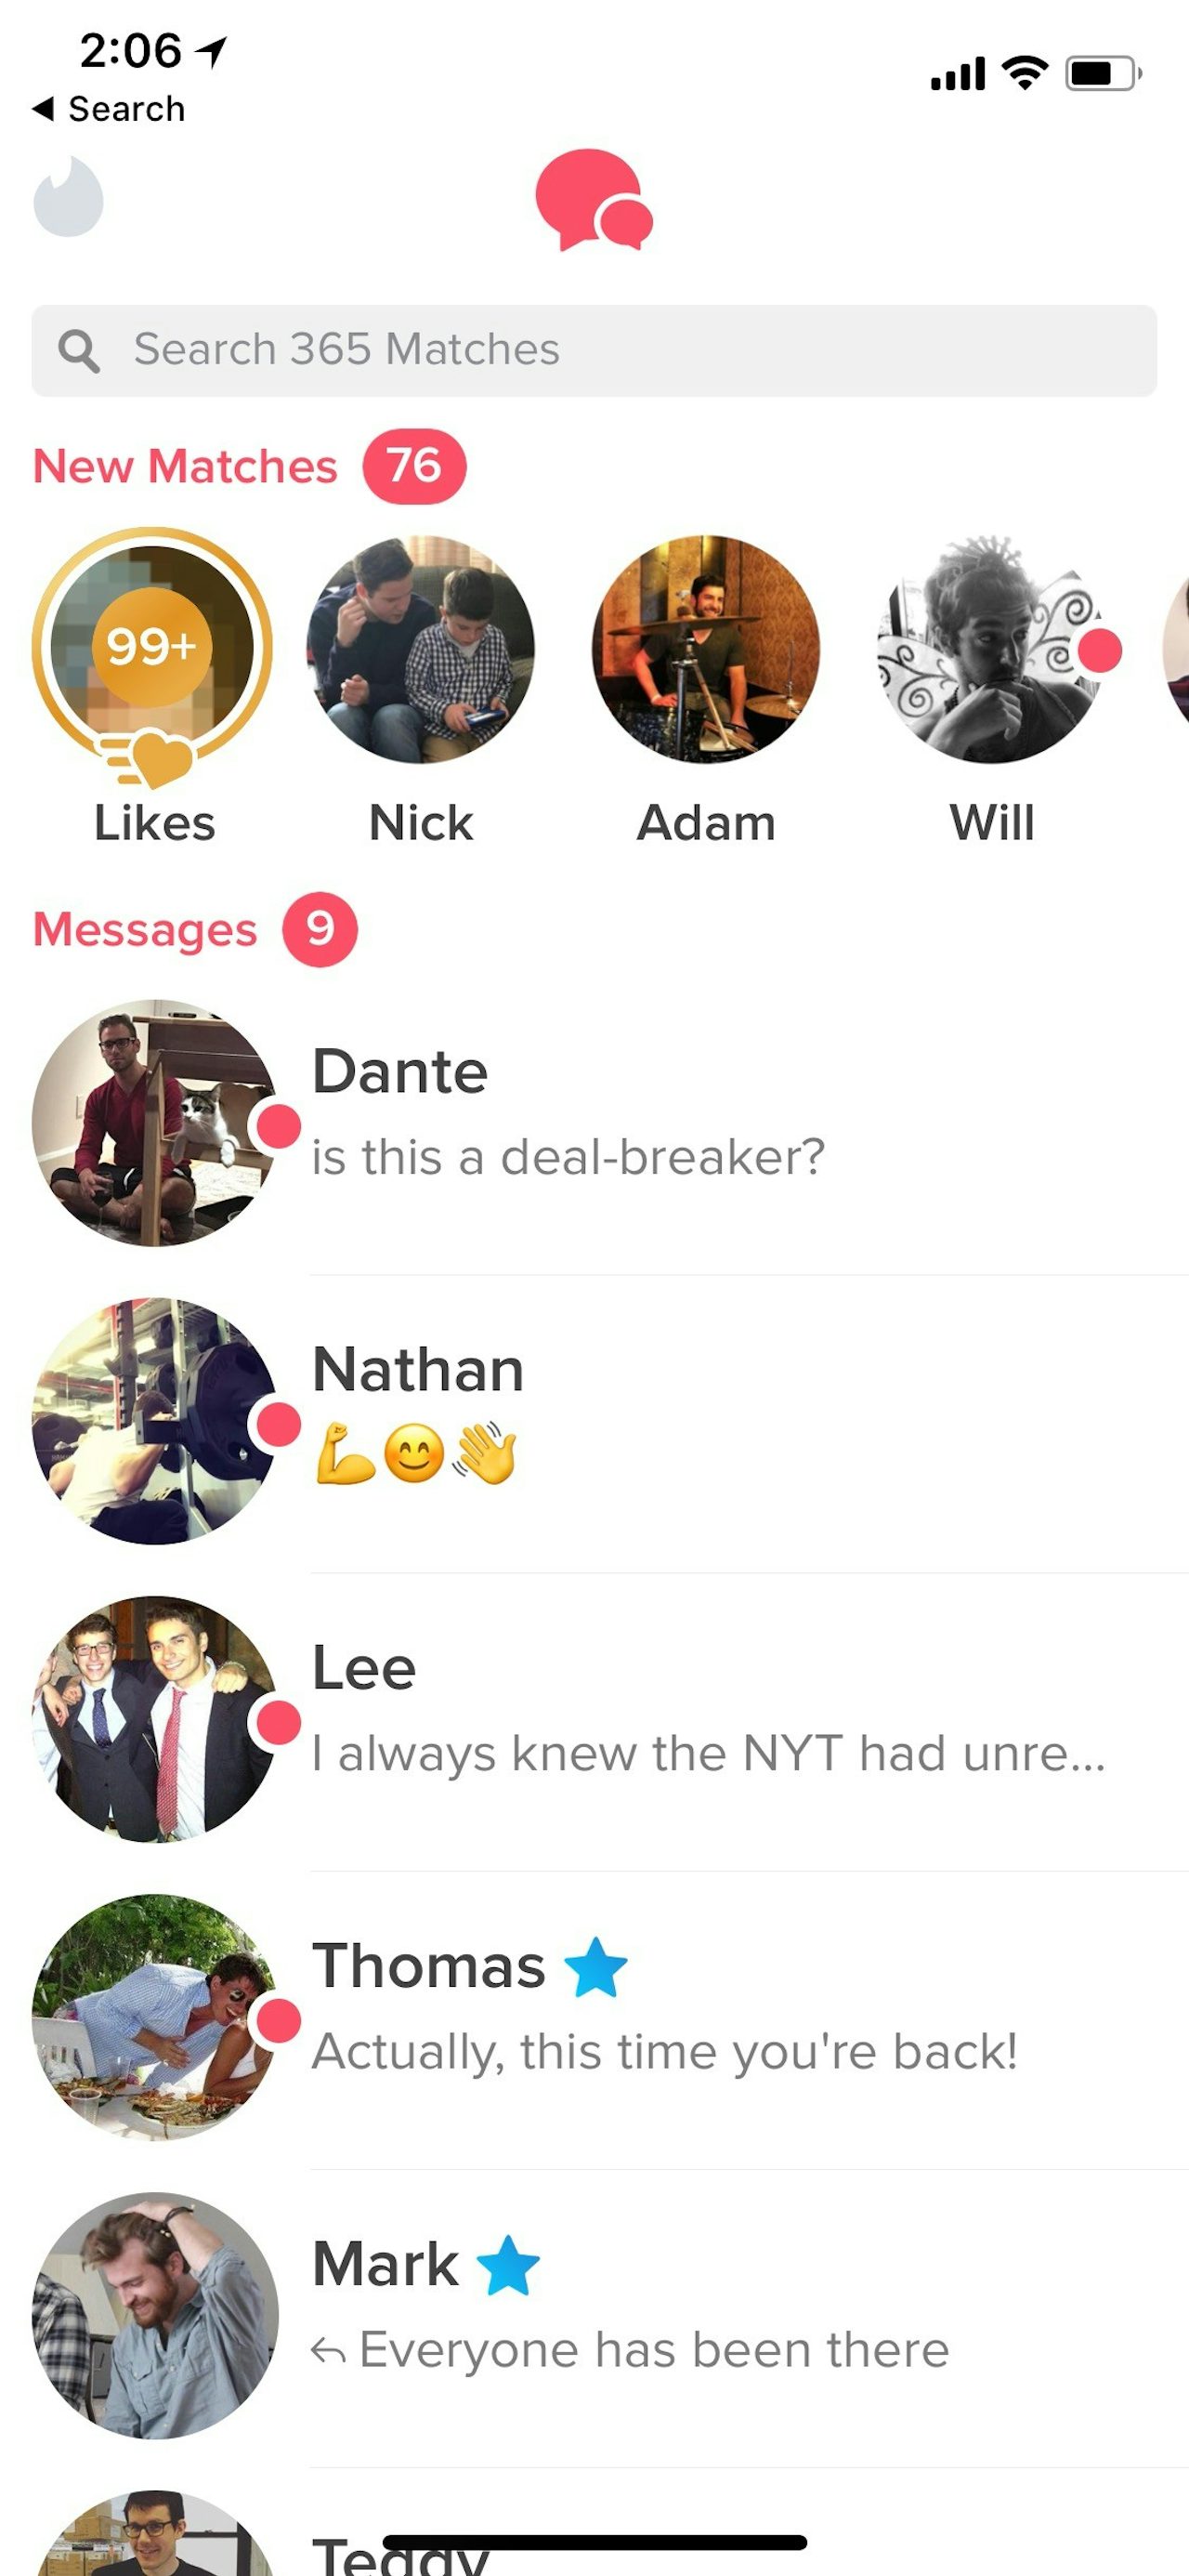 Tinder is not actually for meeting anyone